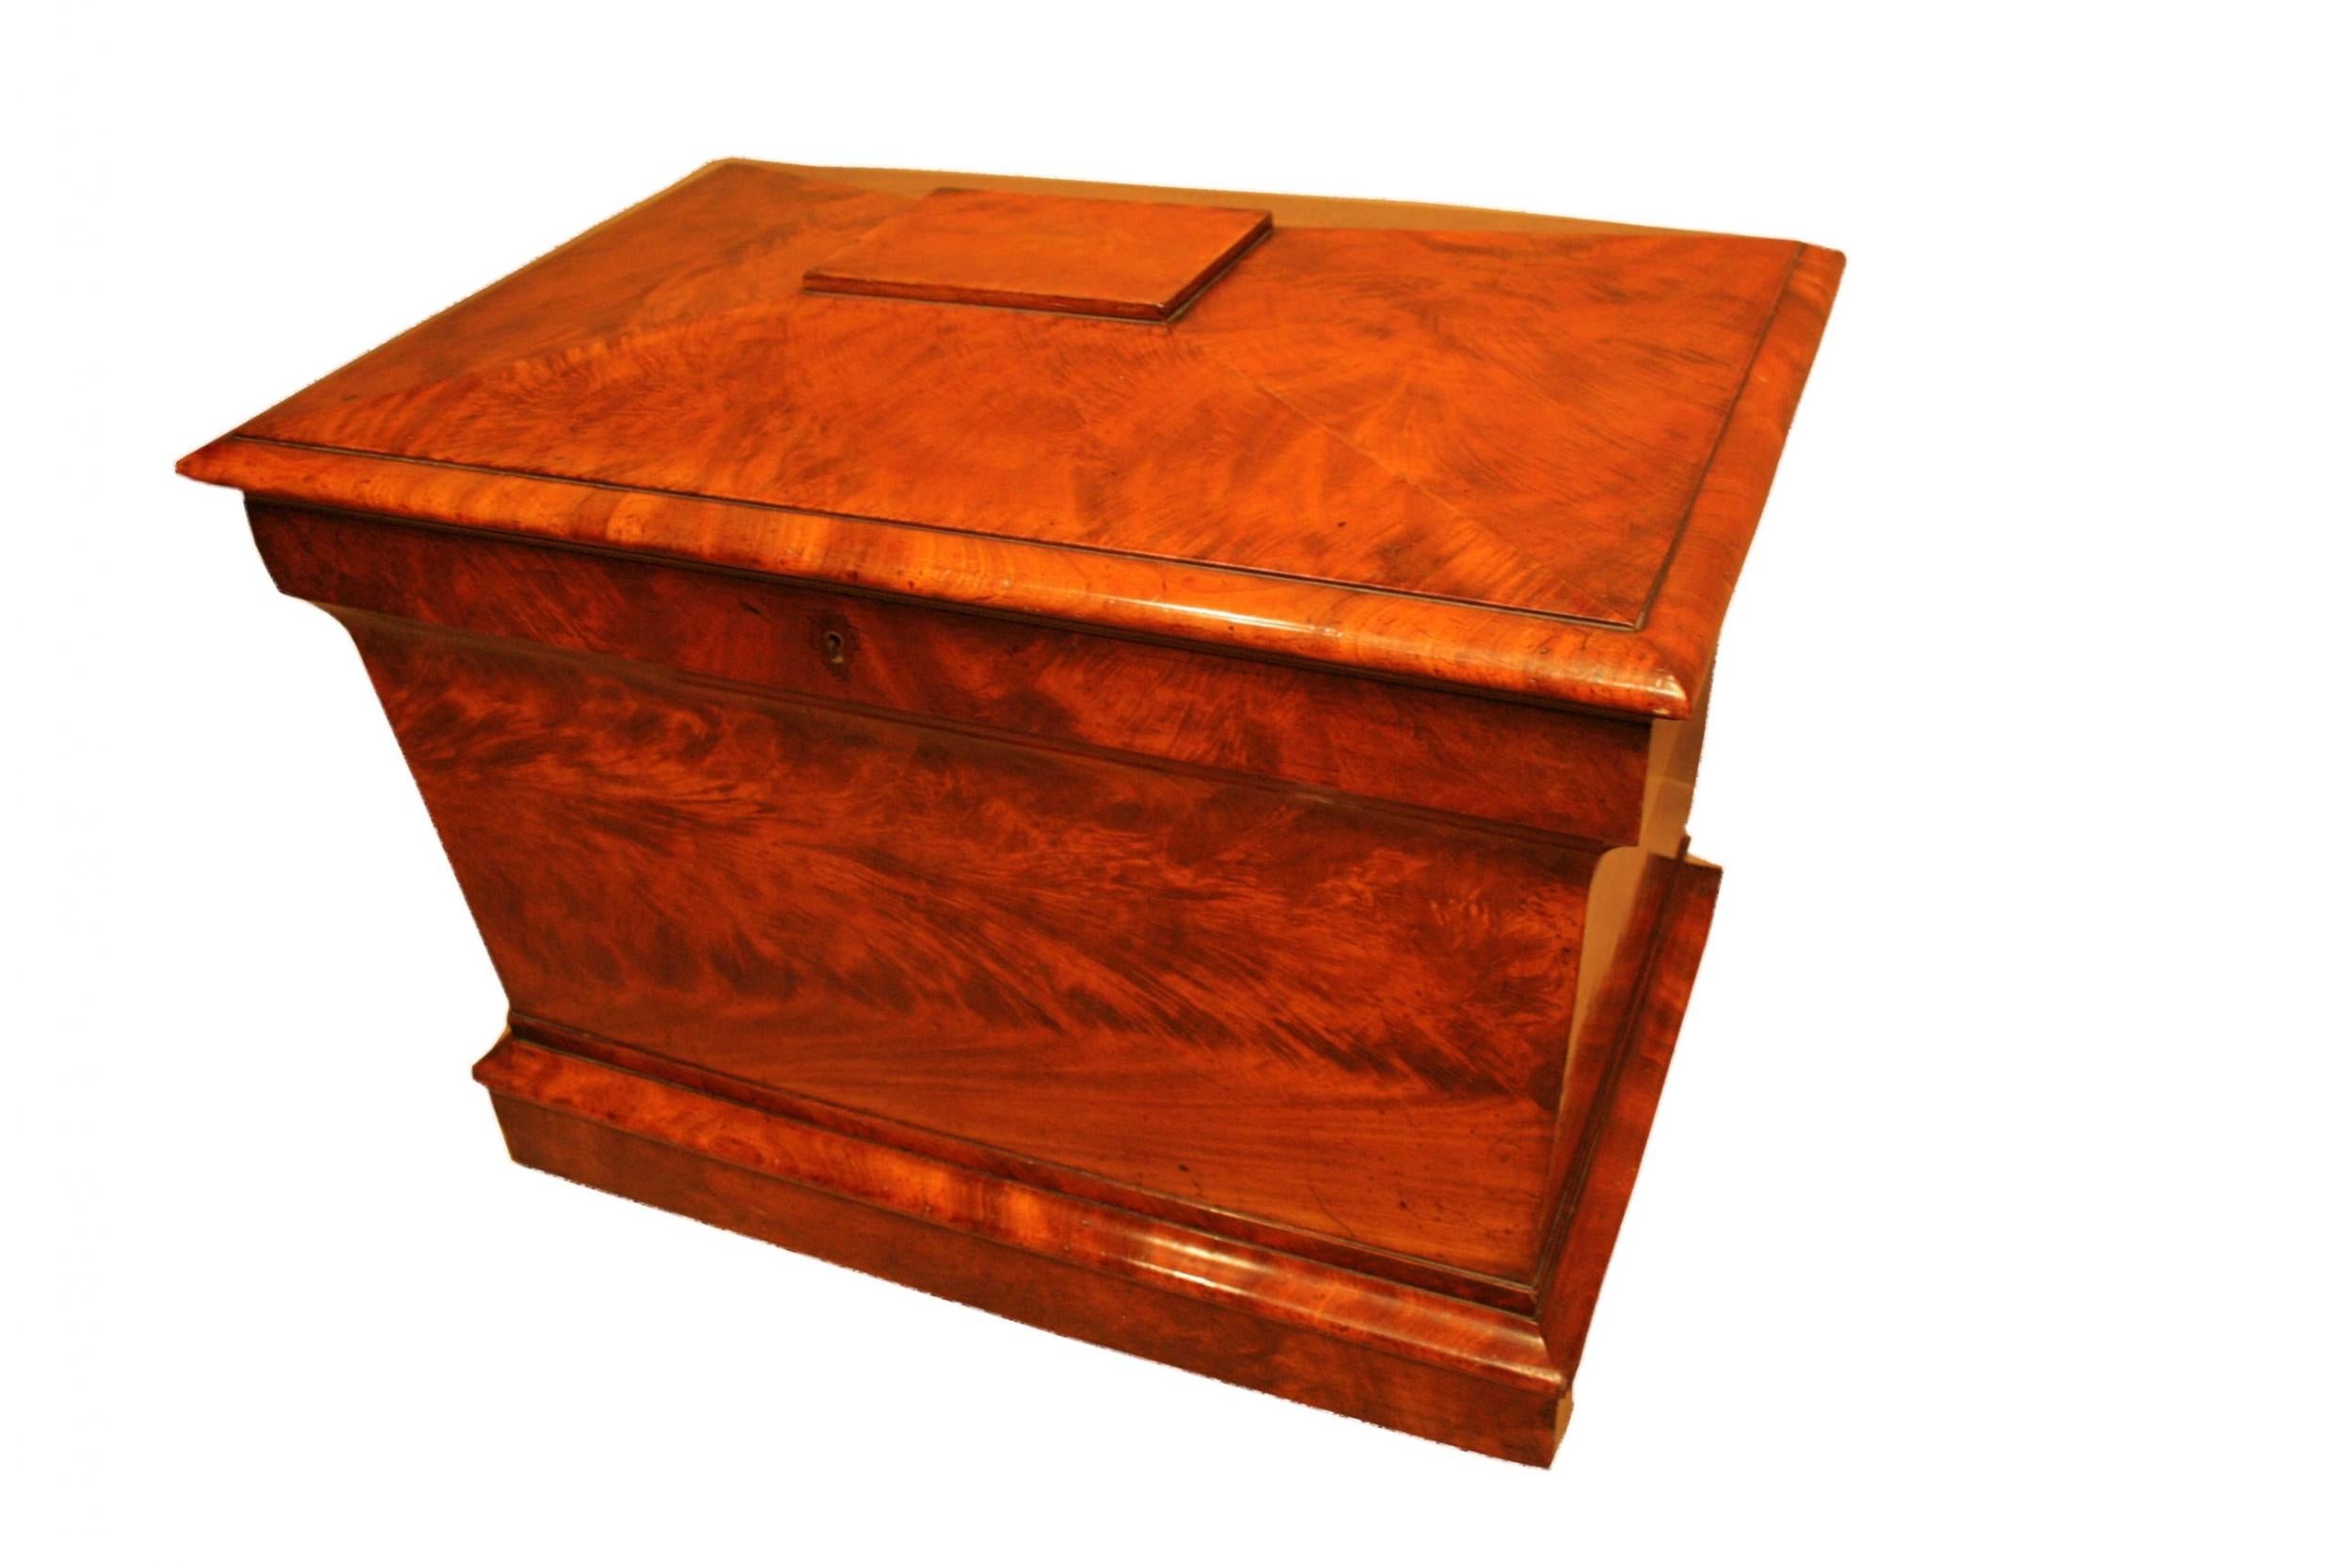 English Early 19th Century George III Flame Mahogany Sarcophagus Wine Cooler For Sale 2